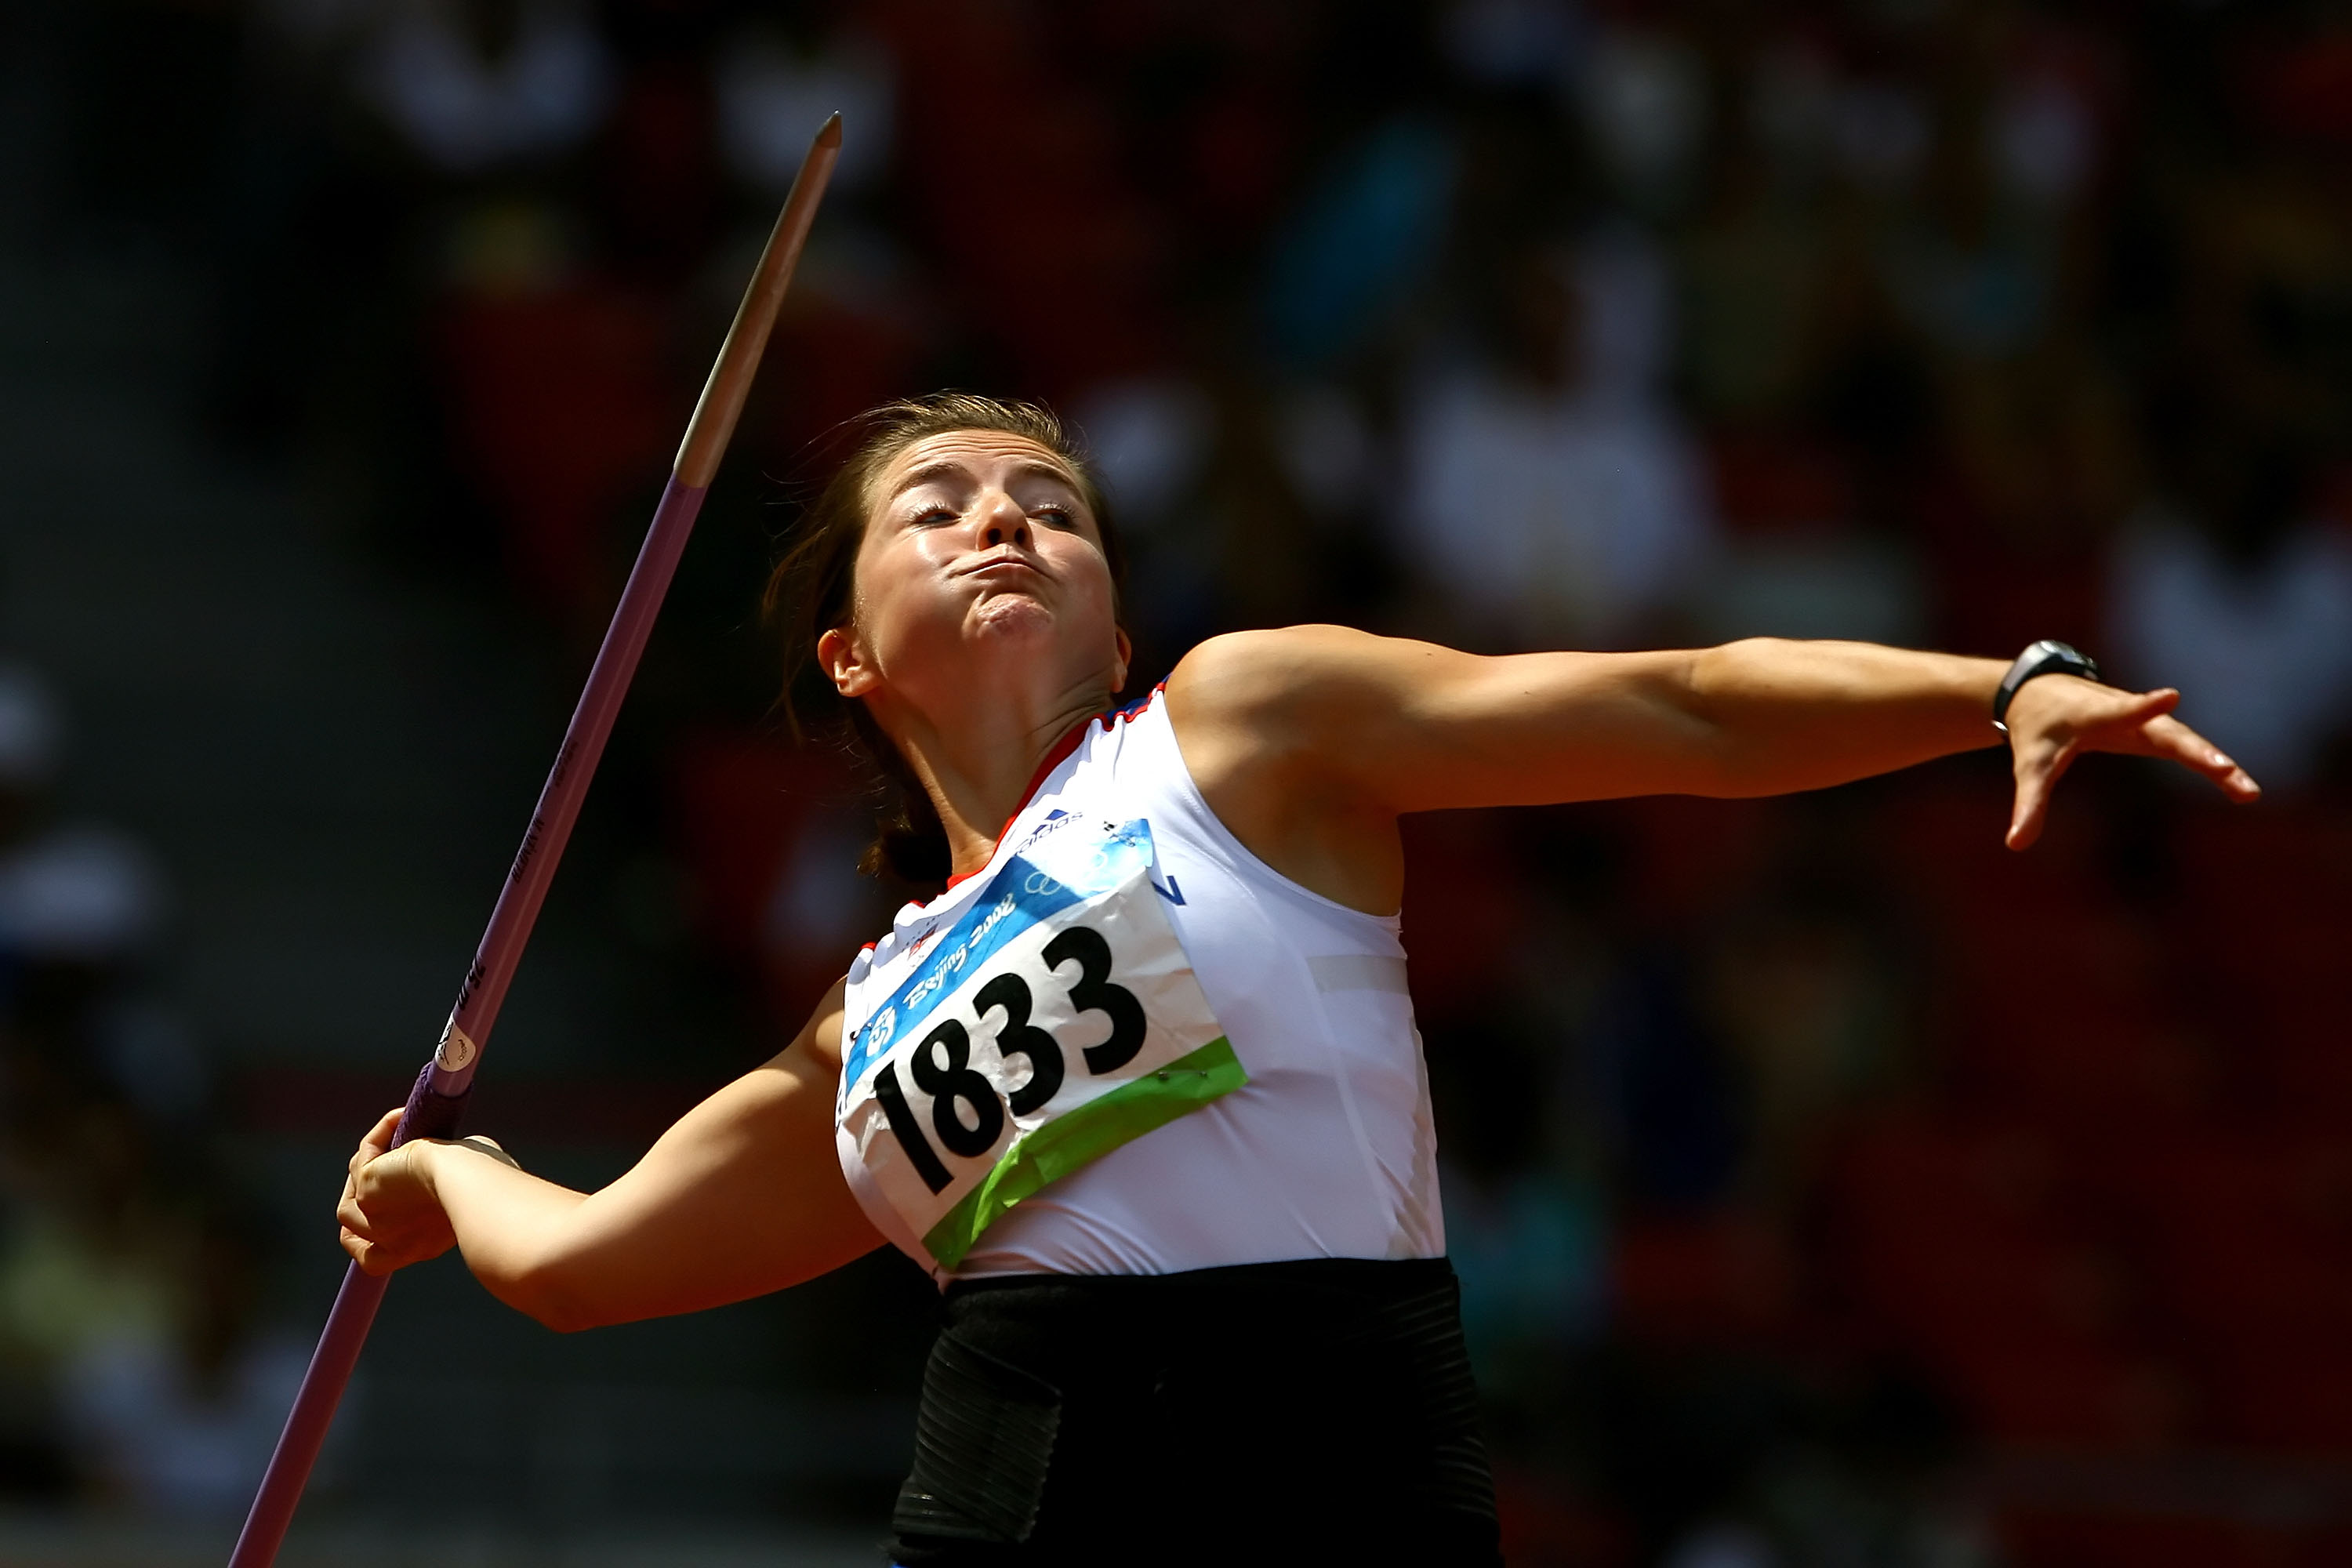 GOLDIE SAYERS TO RECEIVE 2008 OLYMPIC GAMES JAVELIN BRONZE IN LONDON STADIUM